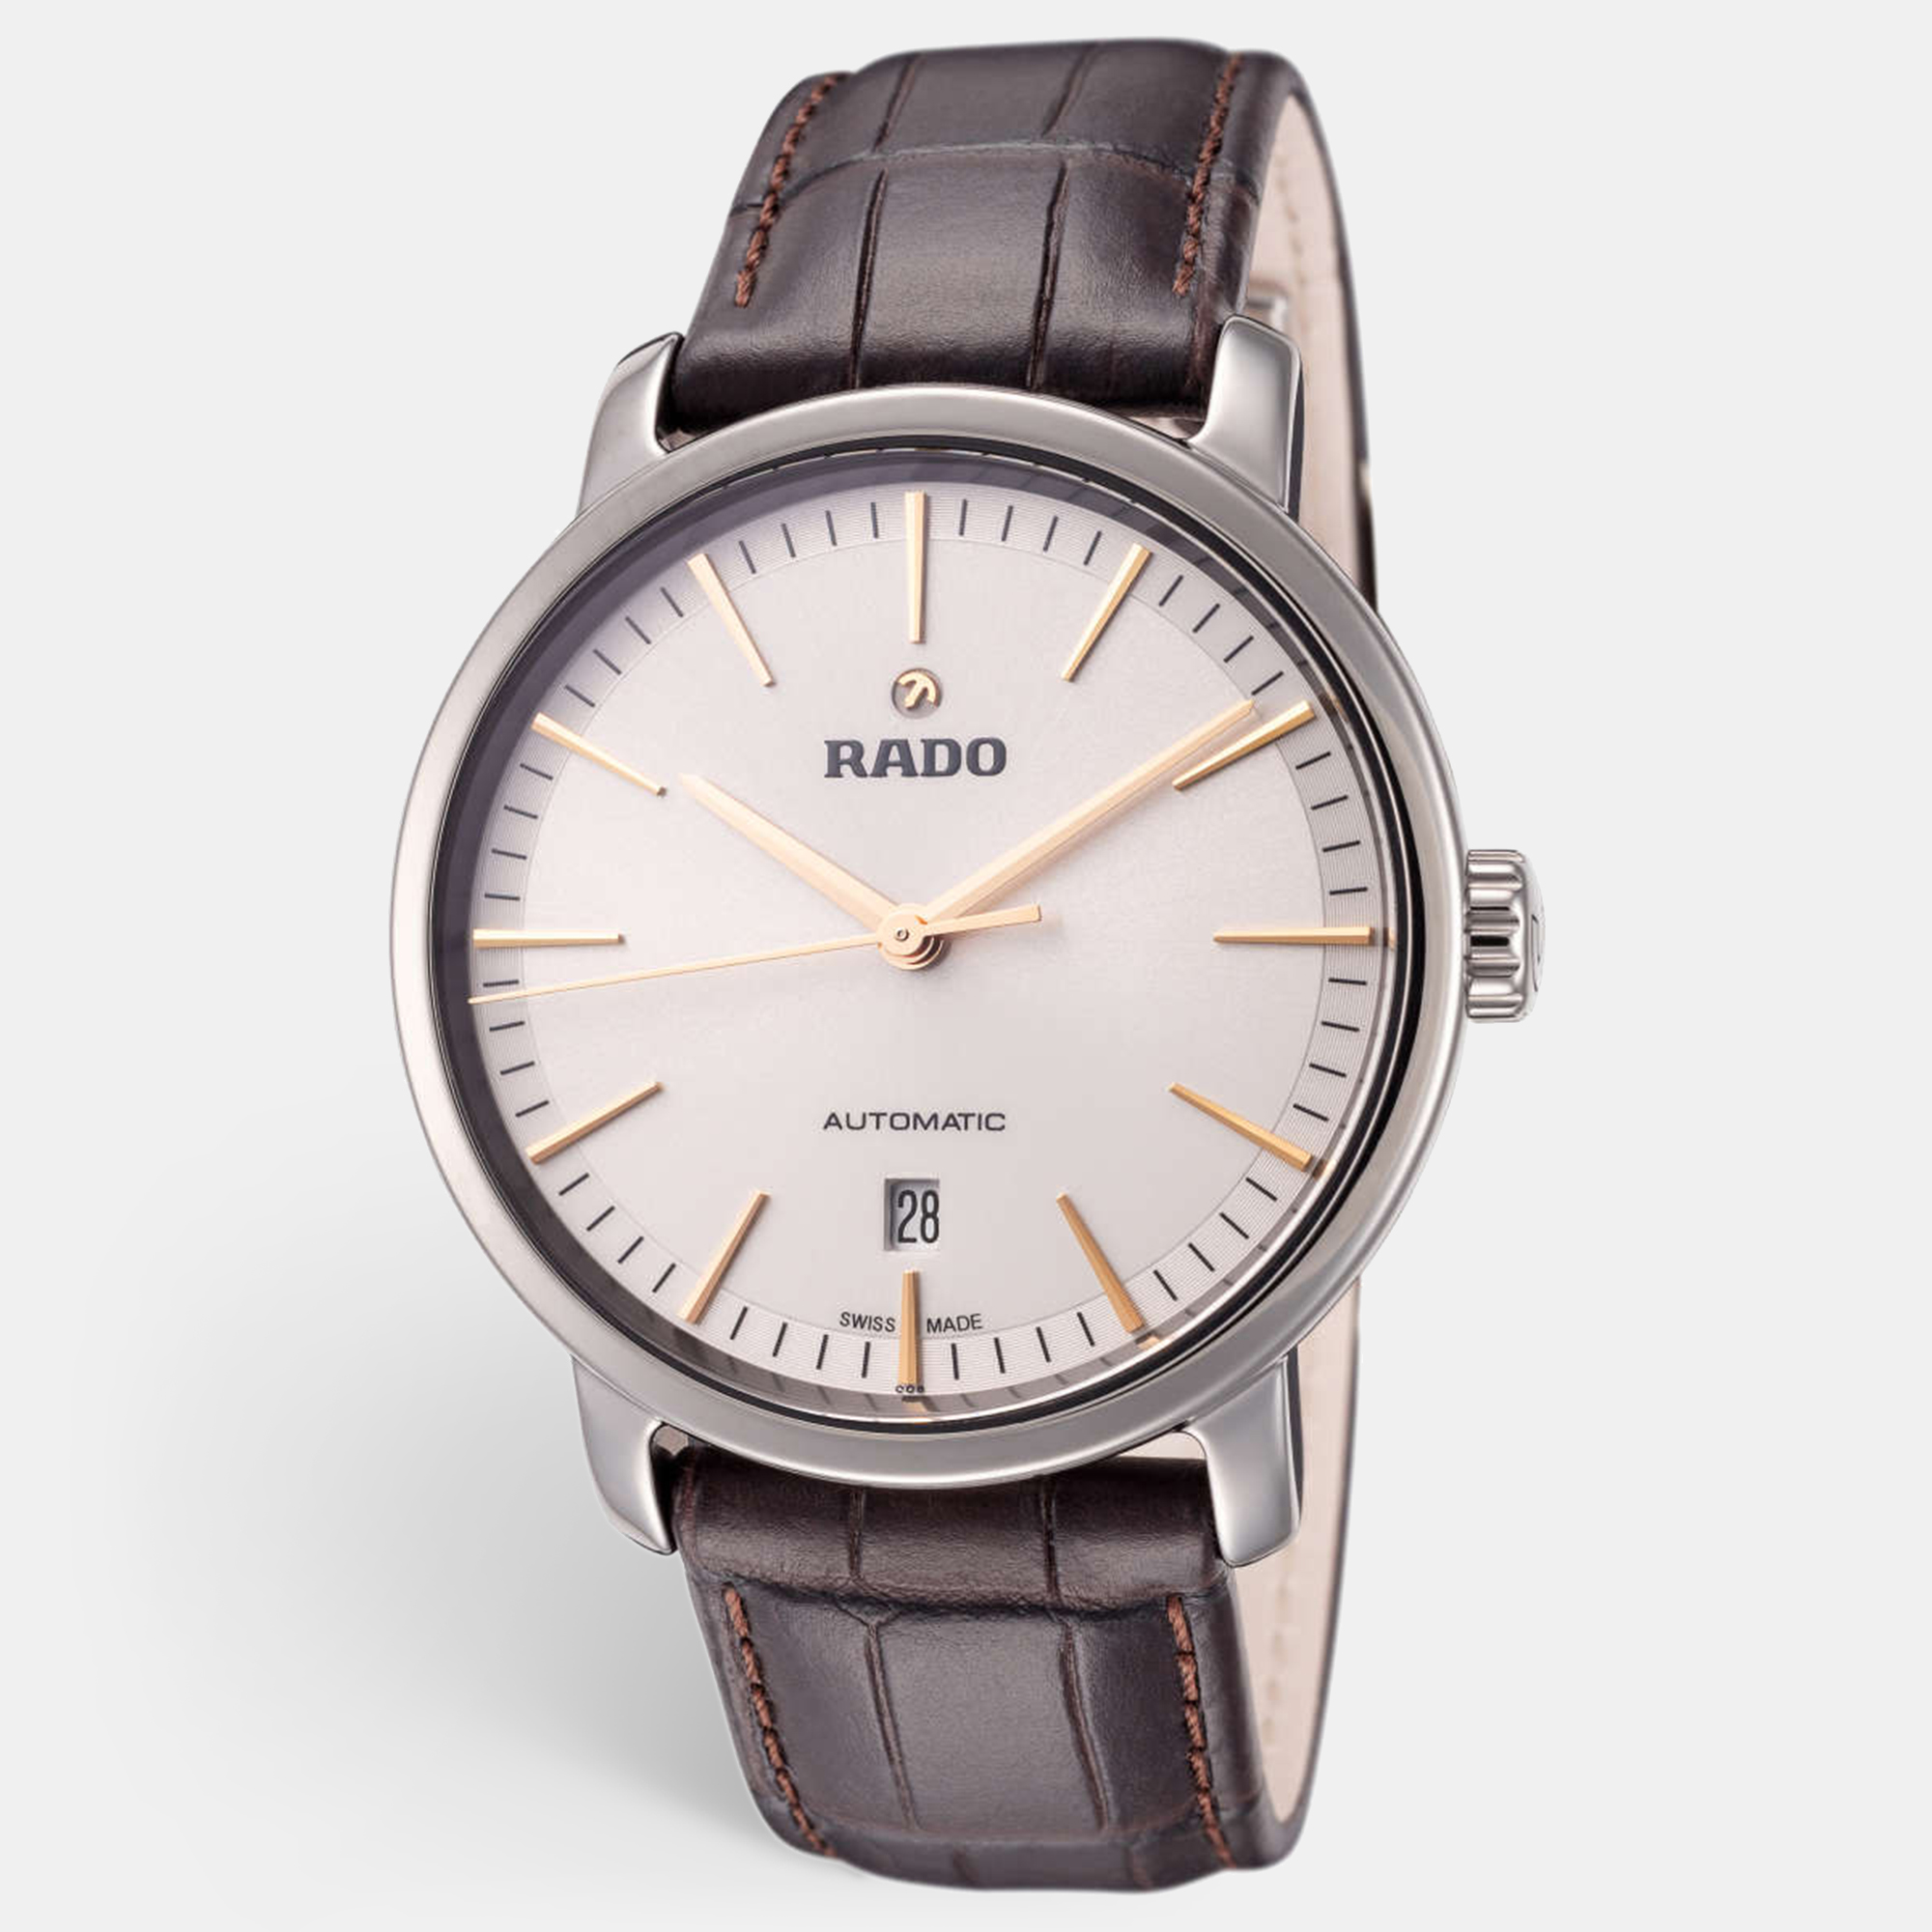 Let this authentic Rado timepiece help you make every moment count Created with skill using high grade materials this watch is a functional accessory designed to impart a luxurious style while keeping you on time.